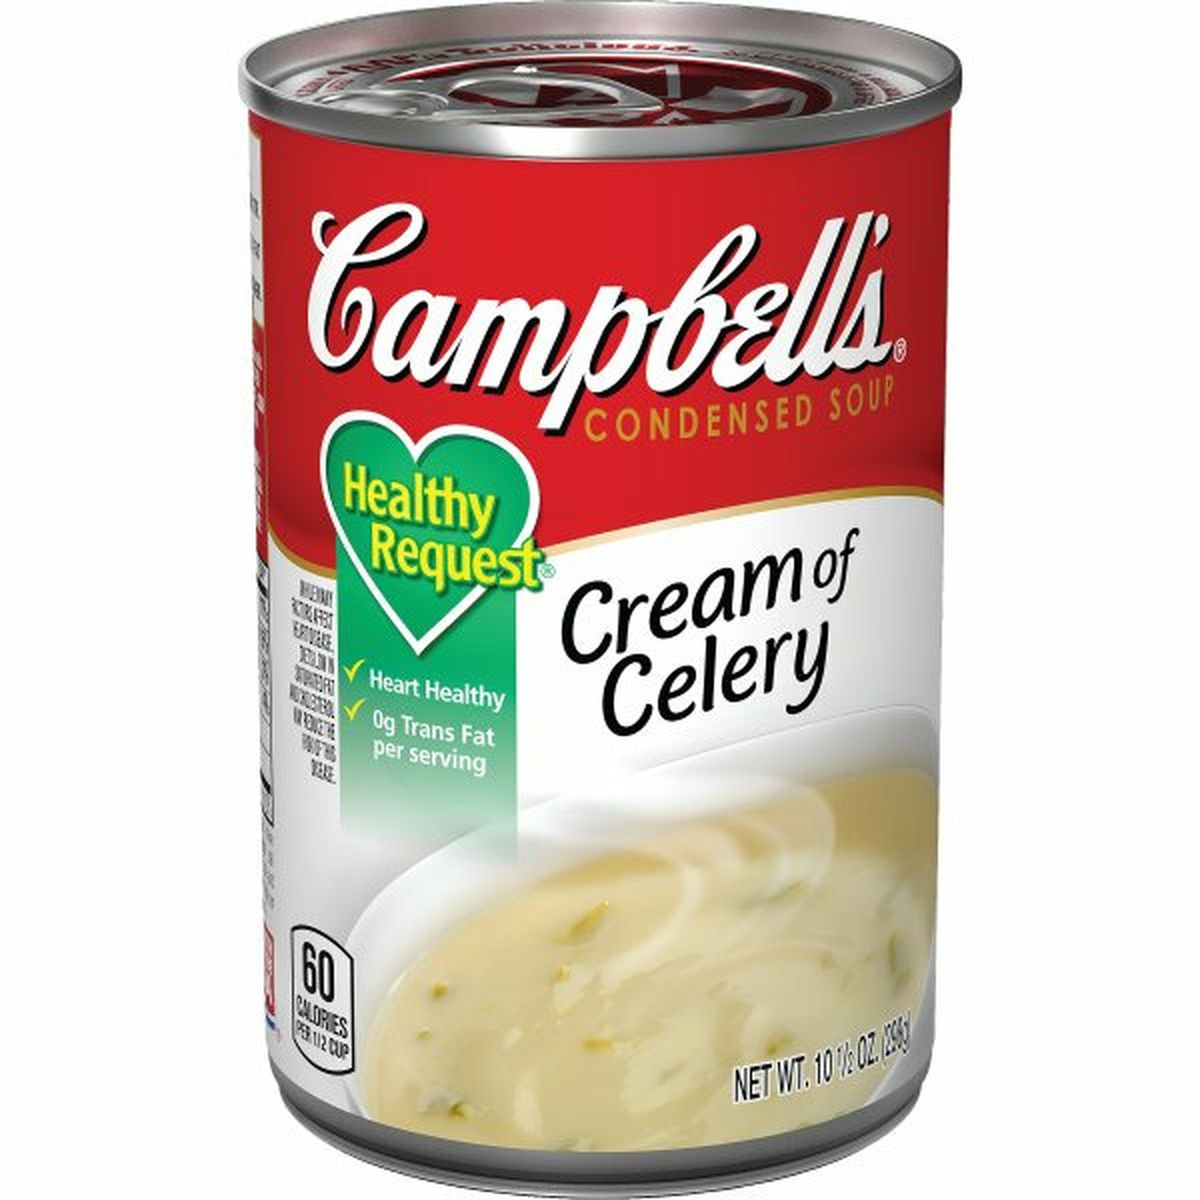 Calories in Campbell'ss Condensed Healthy RequestCream of Celery Soup